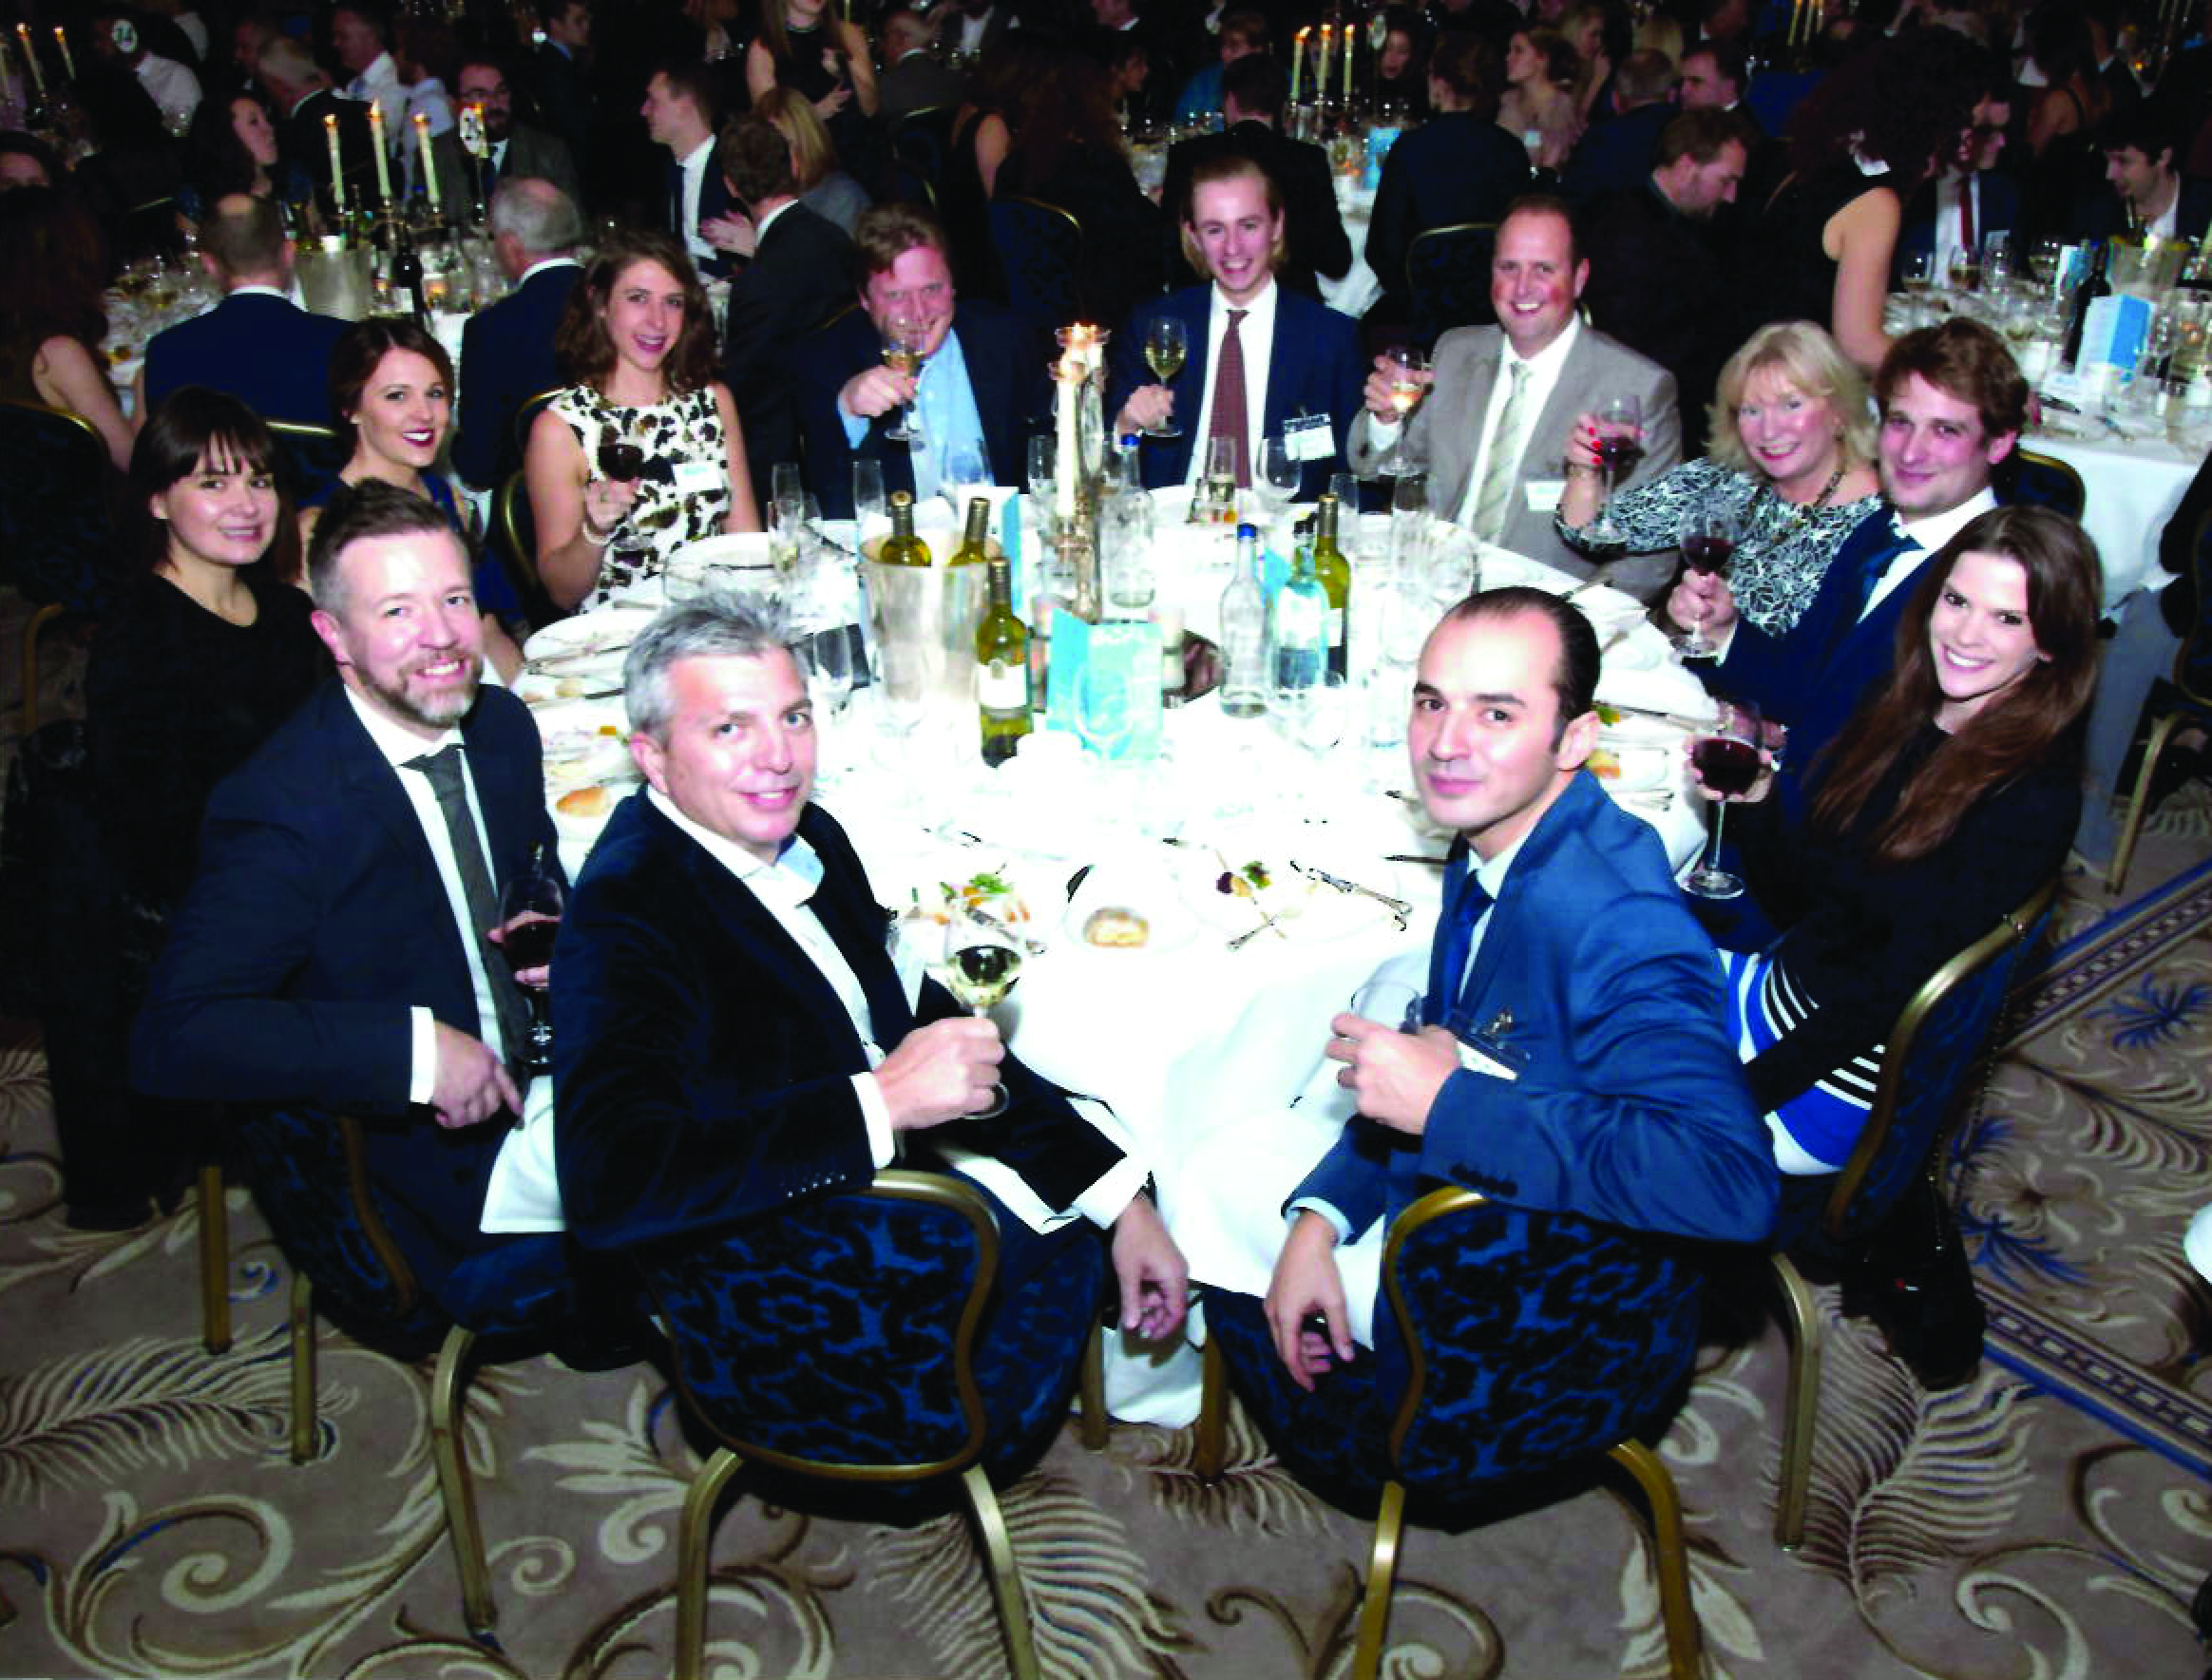 Ulster Carpets attend table at the Dorchester Hotel, London.